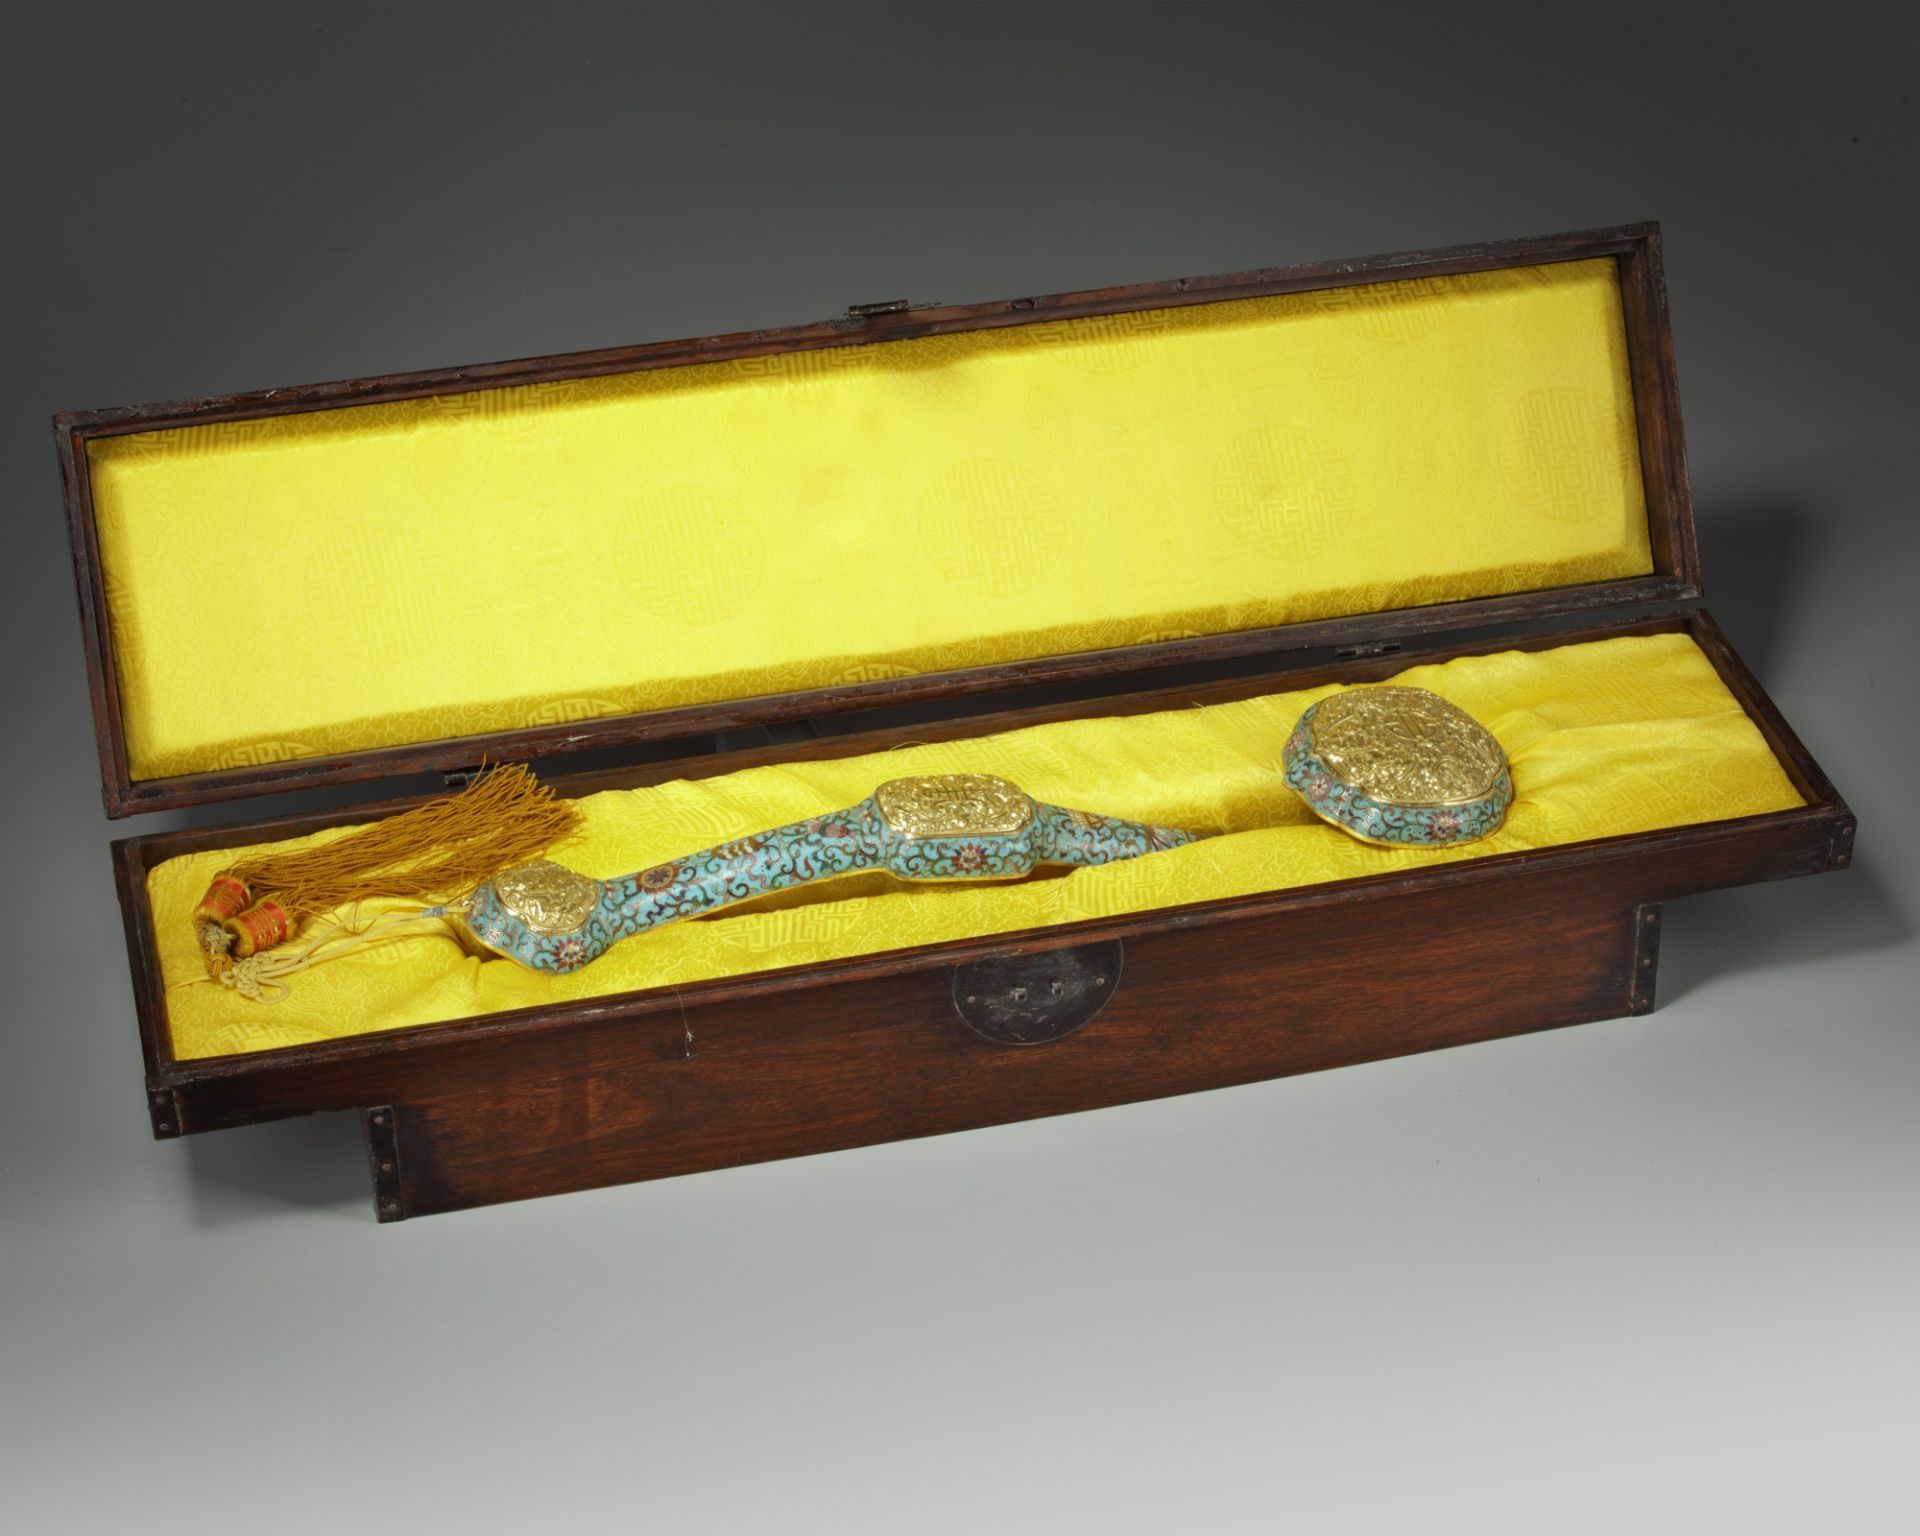 A CHINESE CLOISONNÉ ENAMEL RUYI-SCEPTRE IN A JADE PLAQUE INSET WOOD BOX - Image 2 of 6